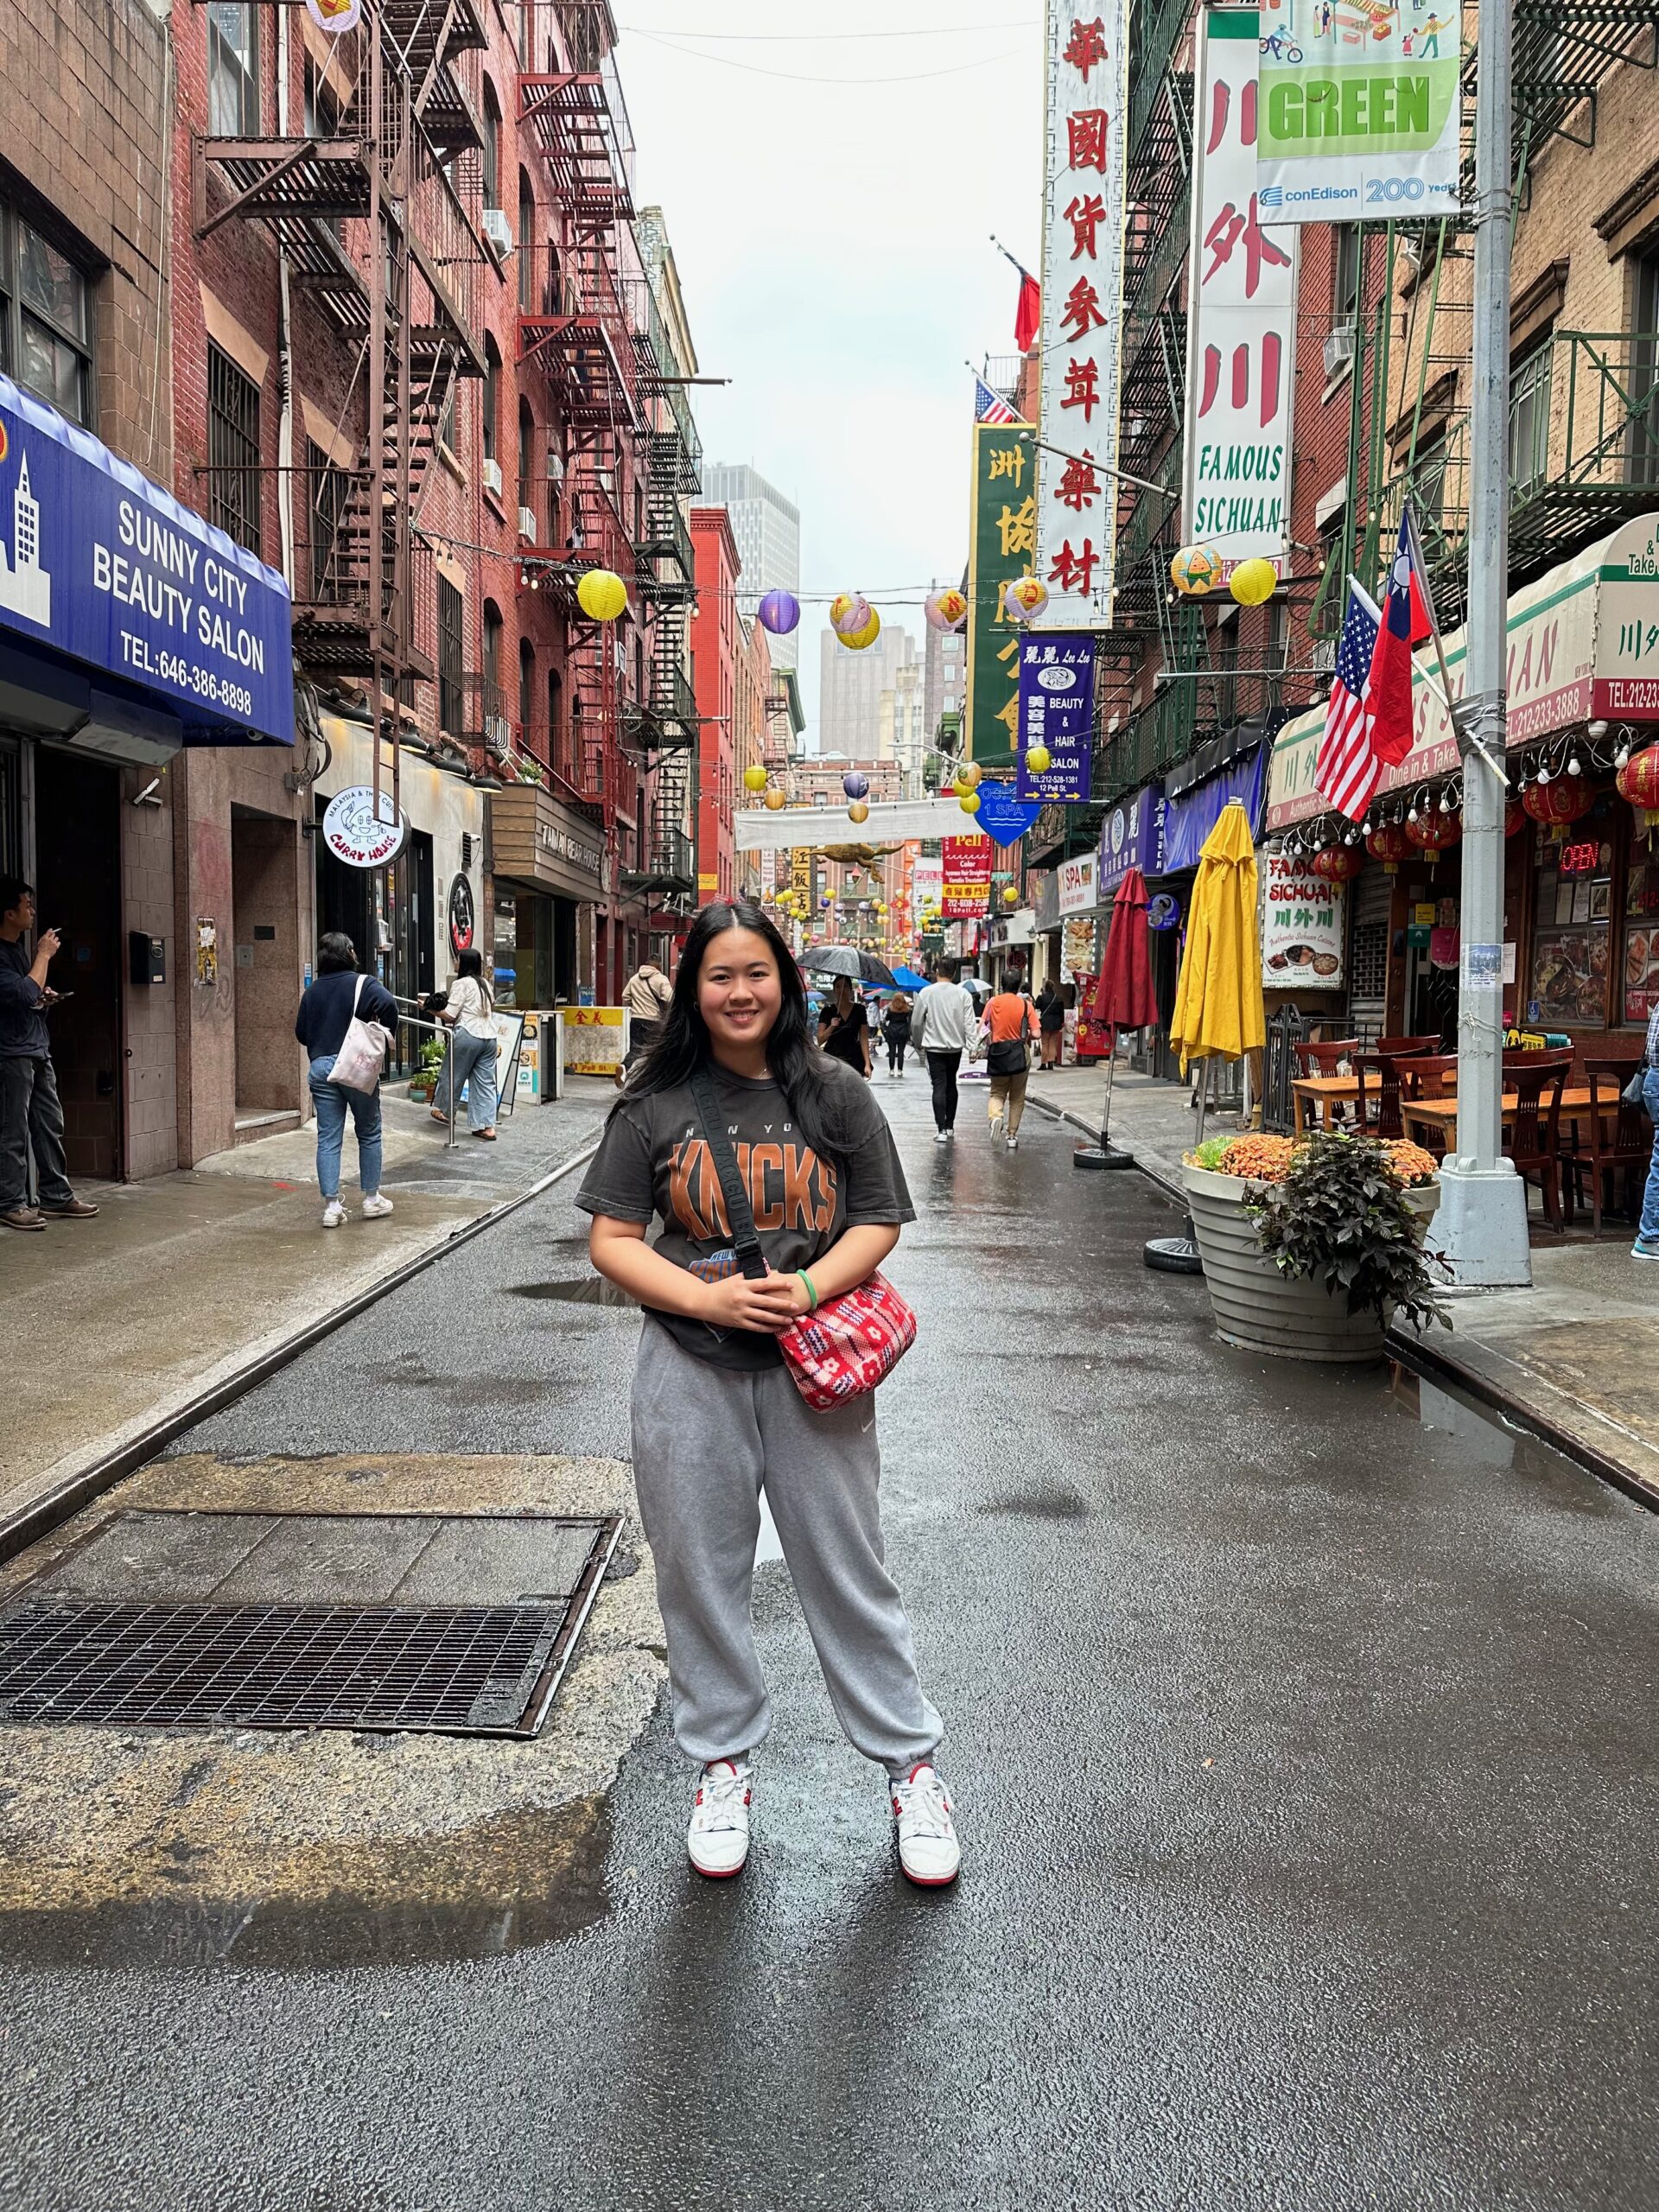 The author stands in the middle of a street in New York City’s Chinatown.